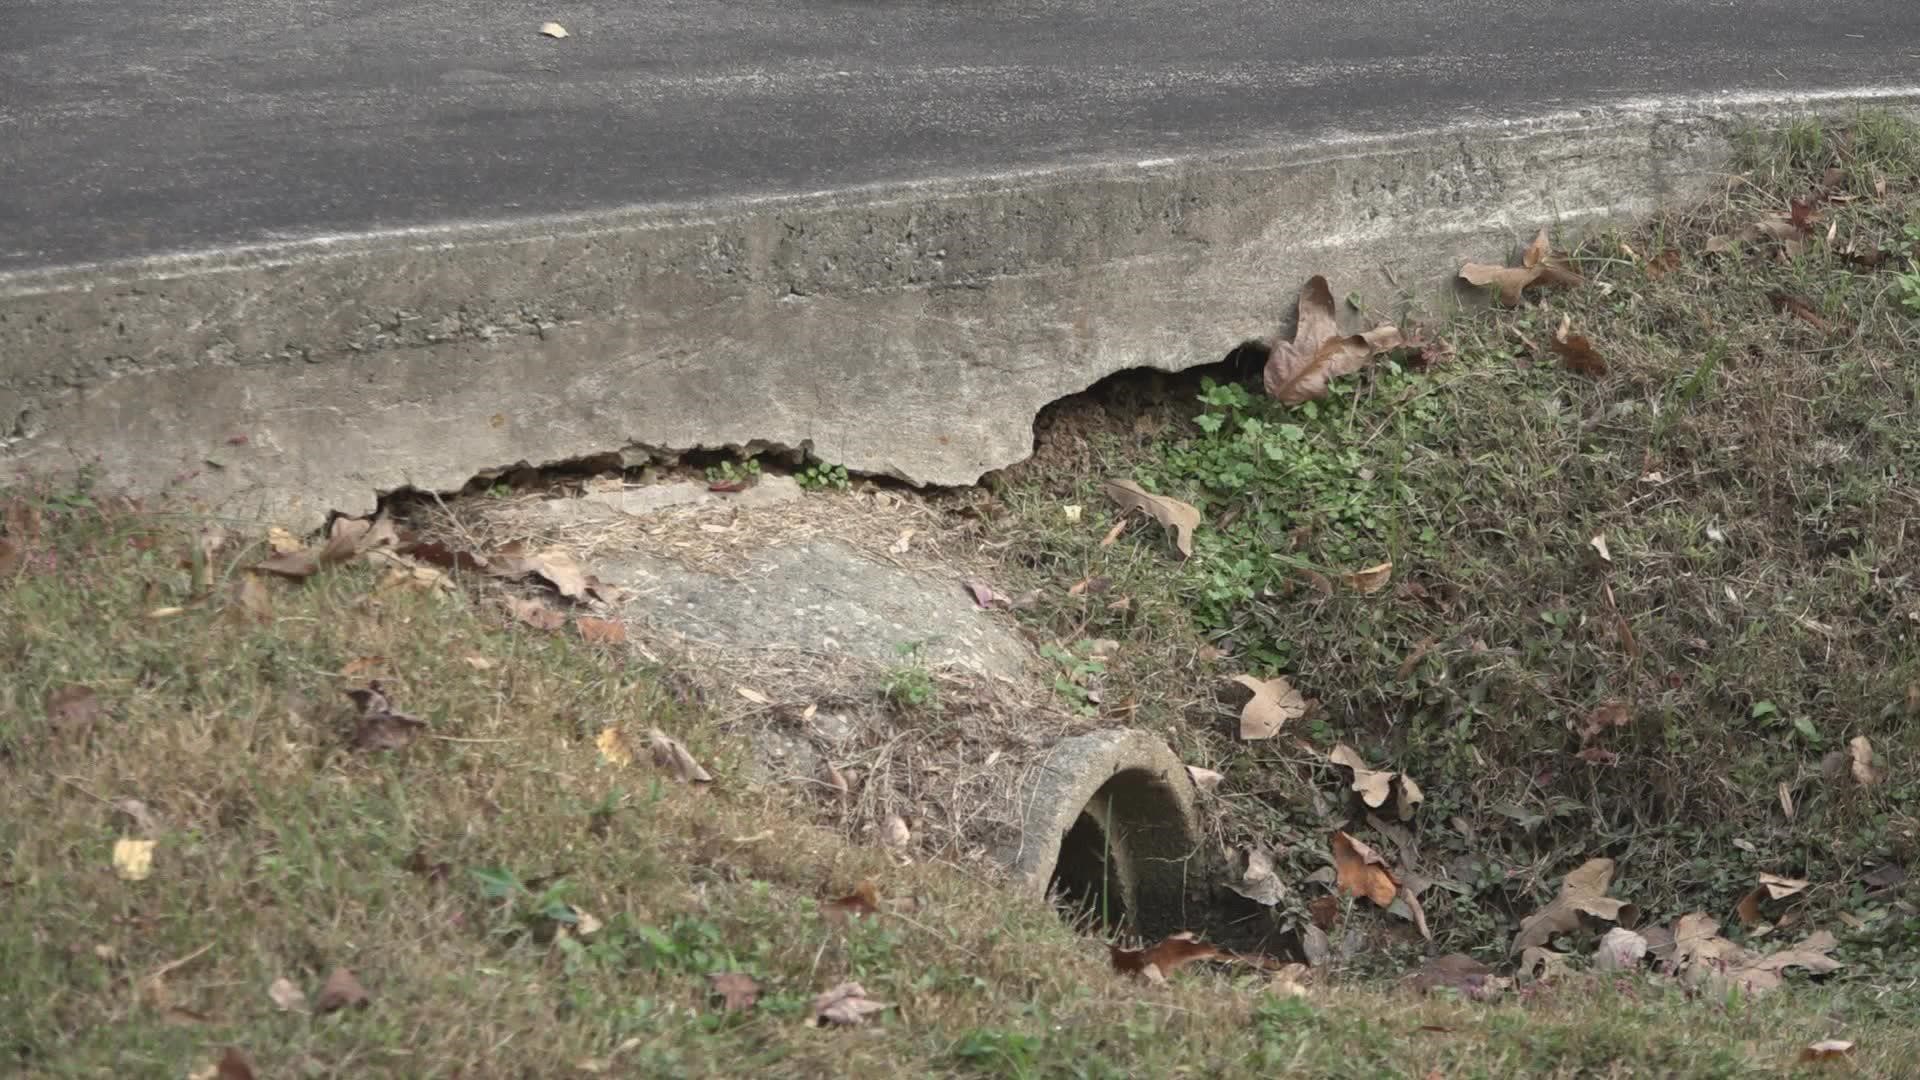 The concrete was damaged after years of erosion. The repairs never happened, and the contractor took months to respond to the family's calls.